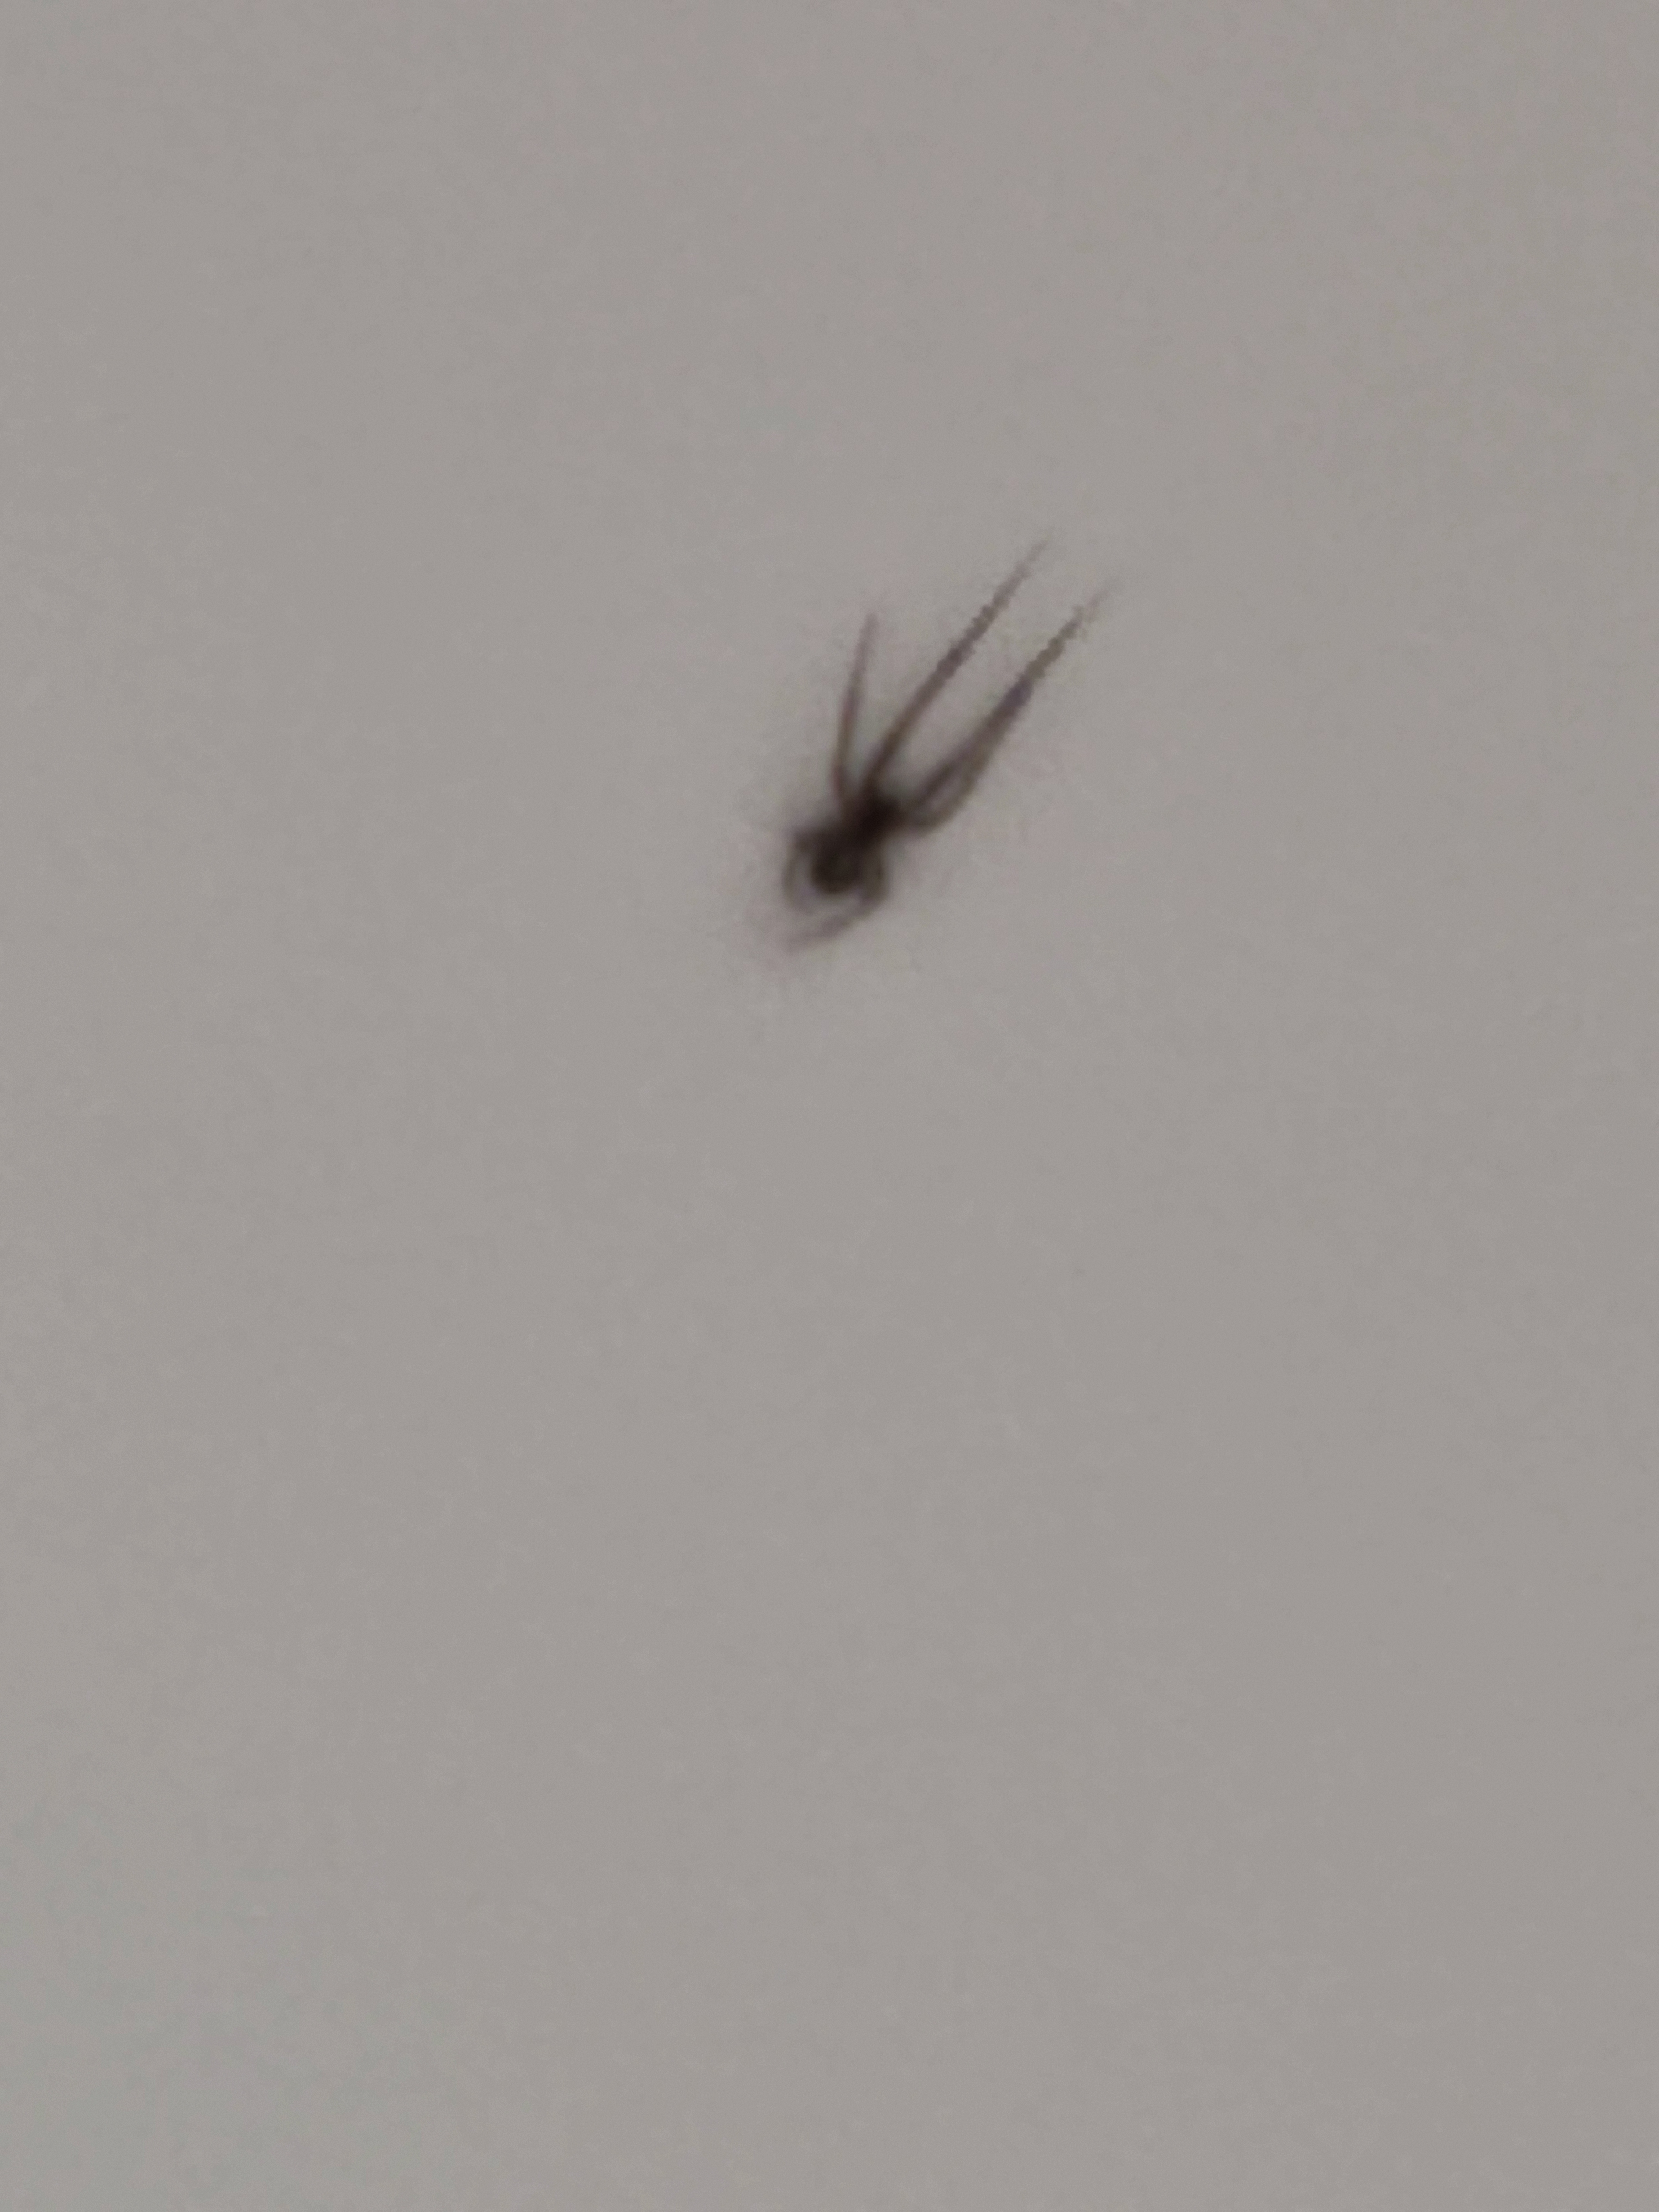 A very blurry picture of a ?Wolf Spider?